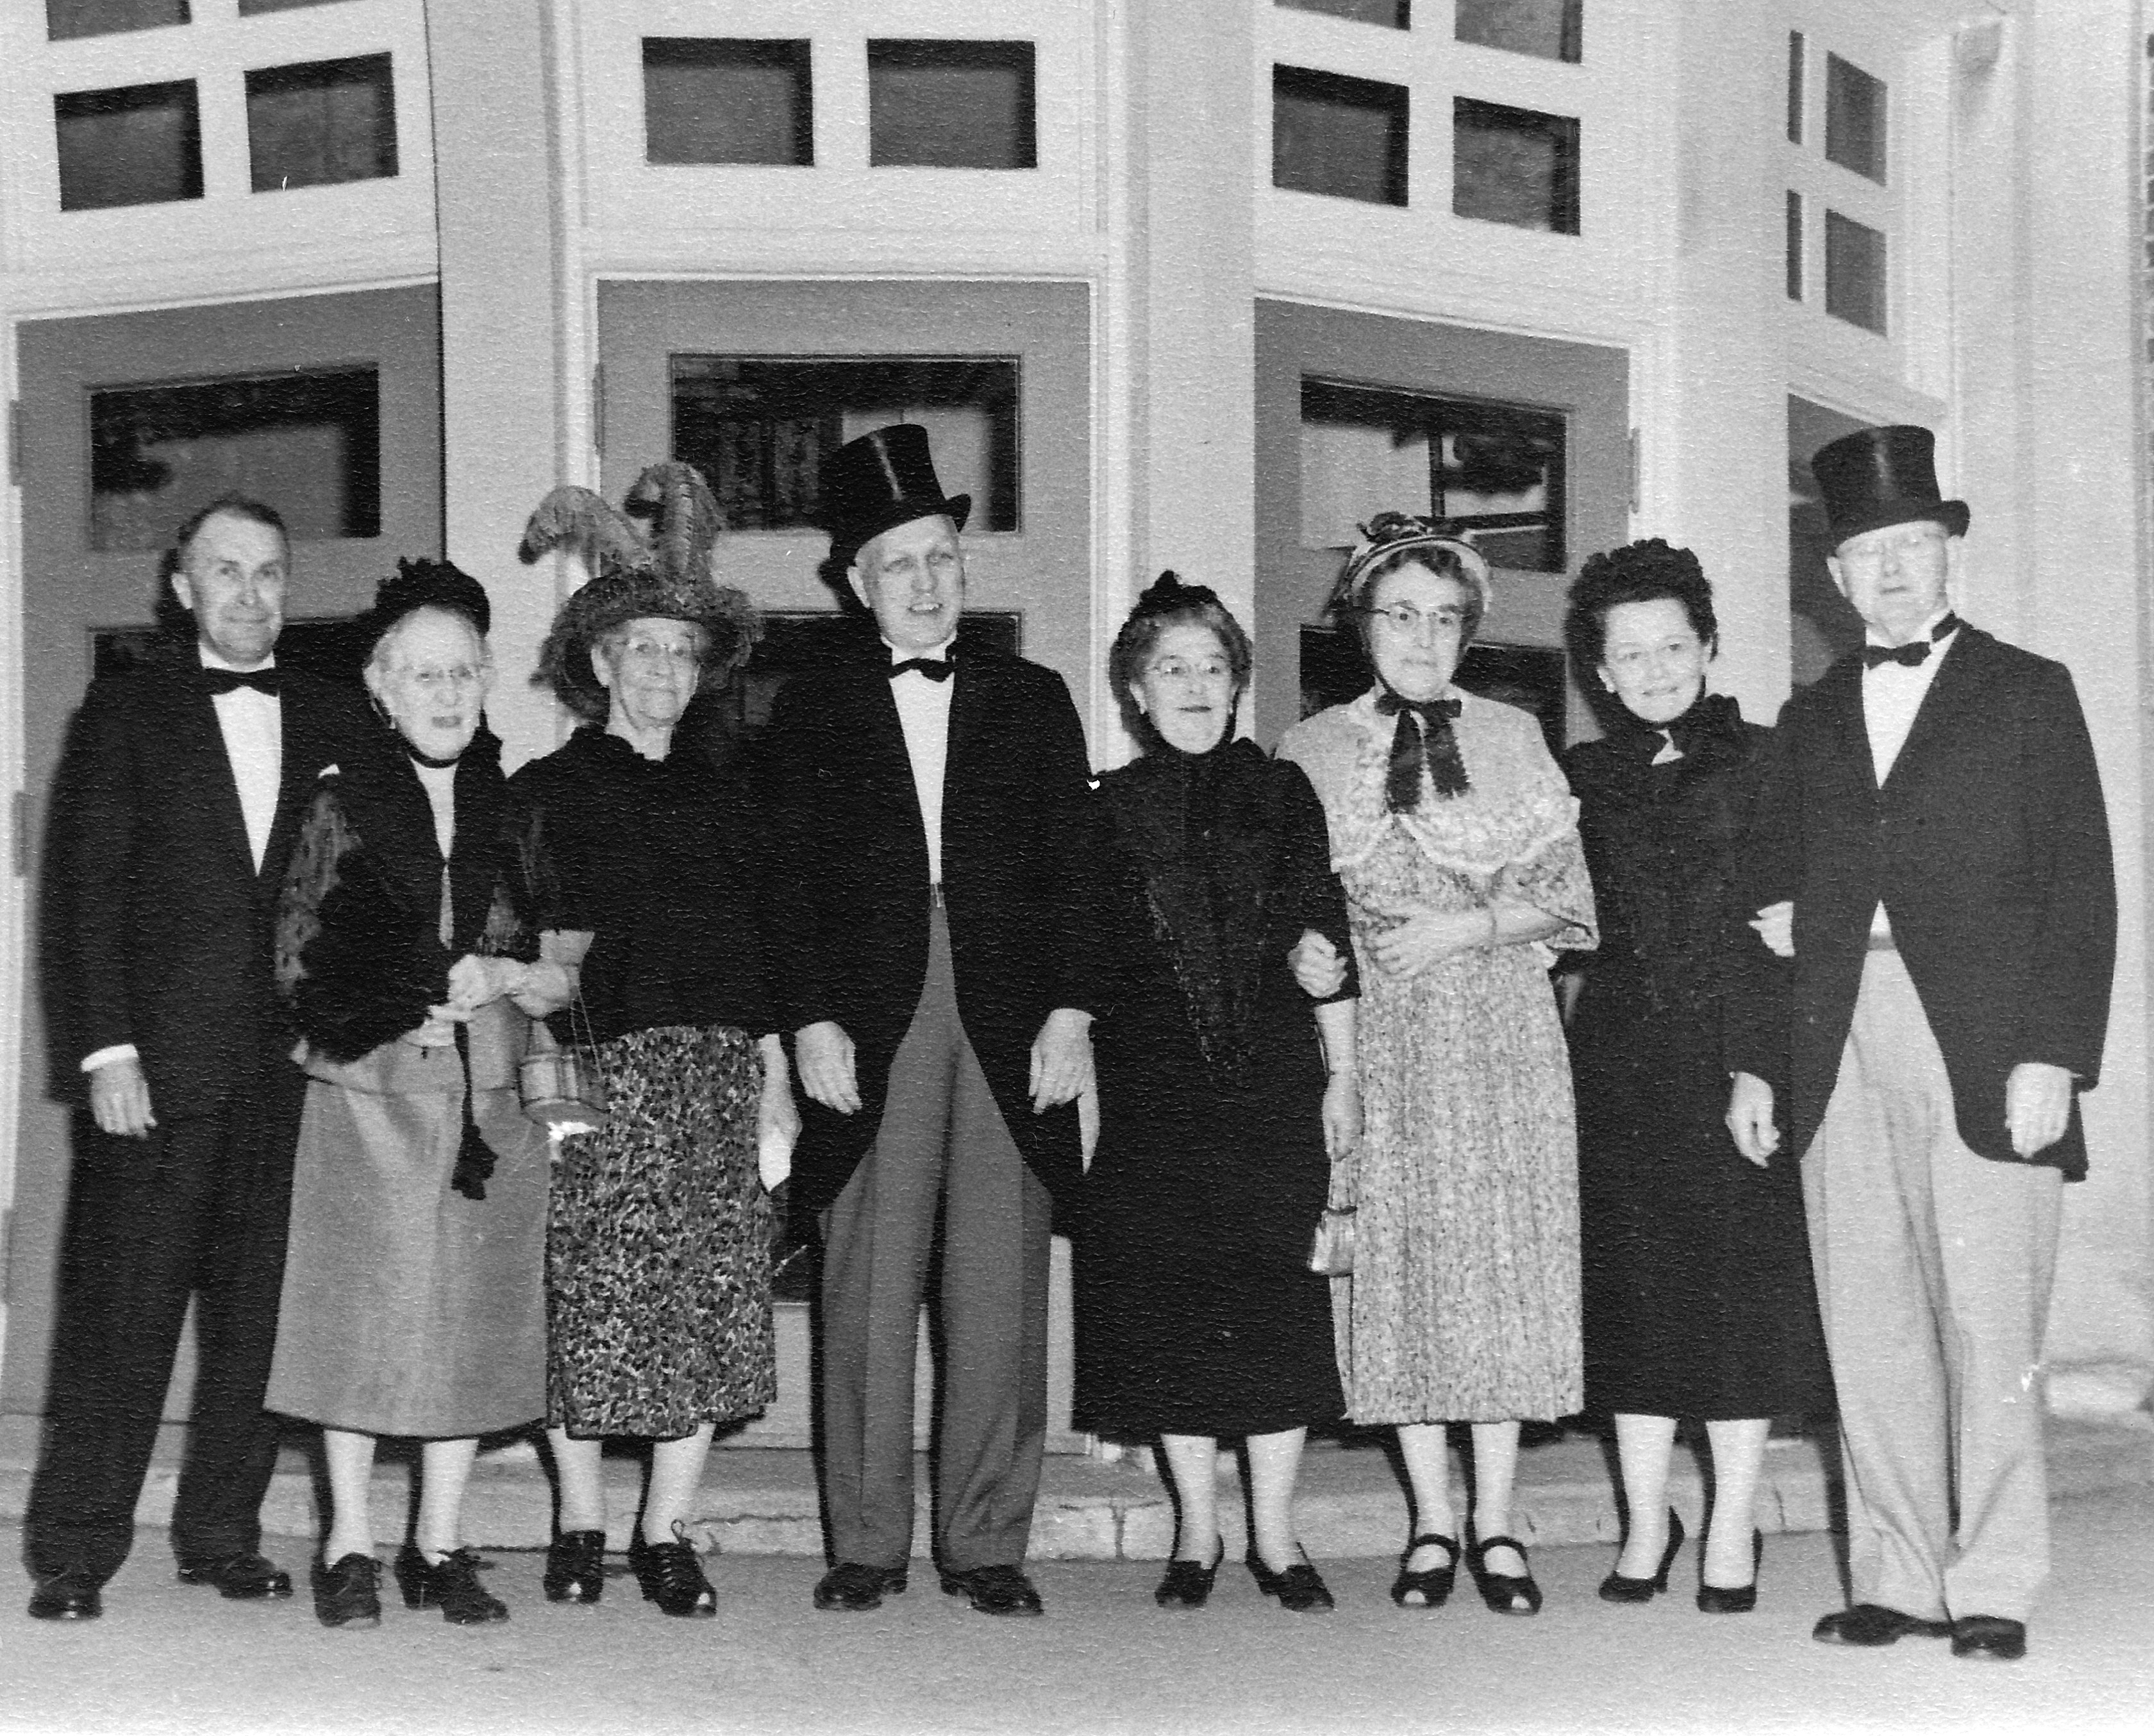 Congregational Church 100th Anniversary observance. Taken in front of Stair Gym before banquet, May 12, 1958. Dale Moore, Josephine Kellogg, Nellie Thompson, Henry Geisler, Margaret Buck, Mary Blanchard, Esther Tuttle, Art Buck.